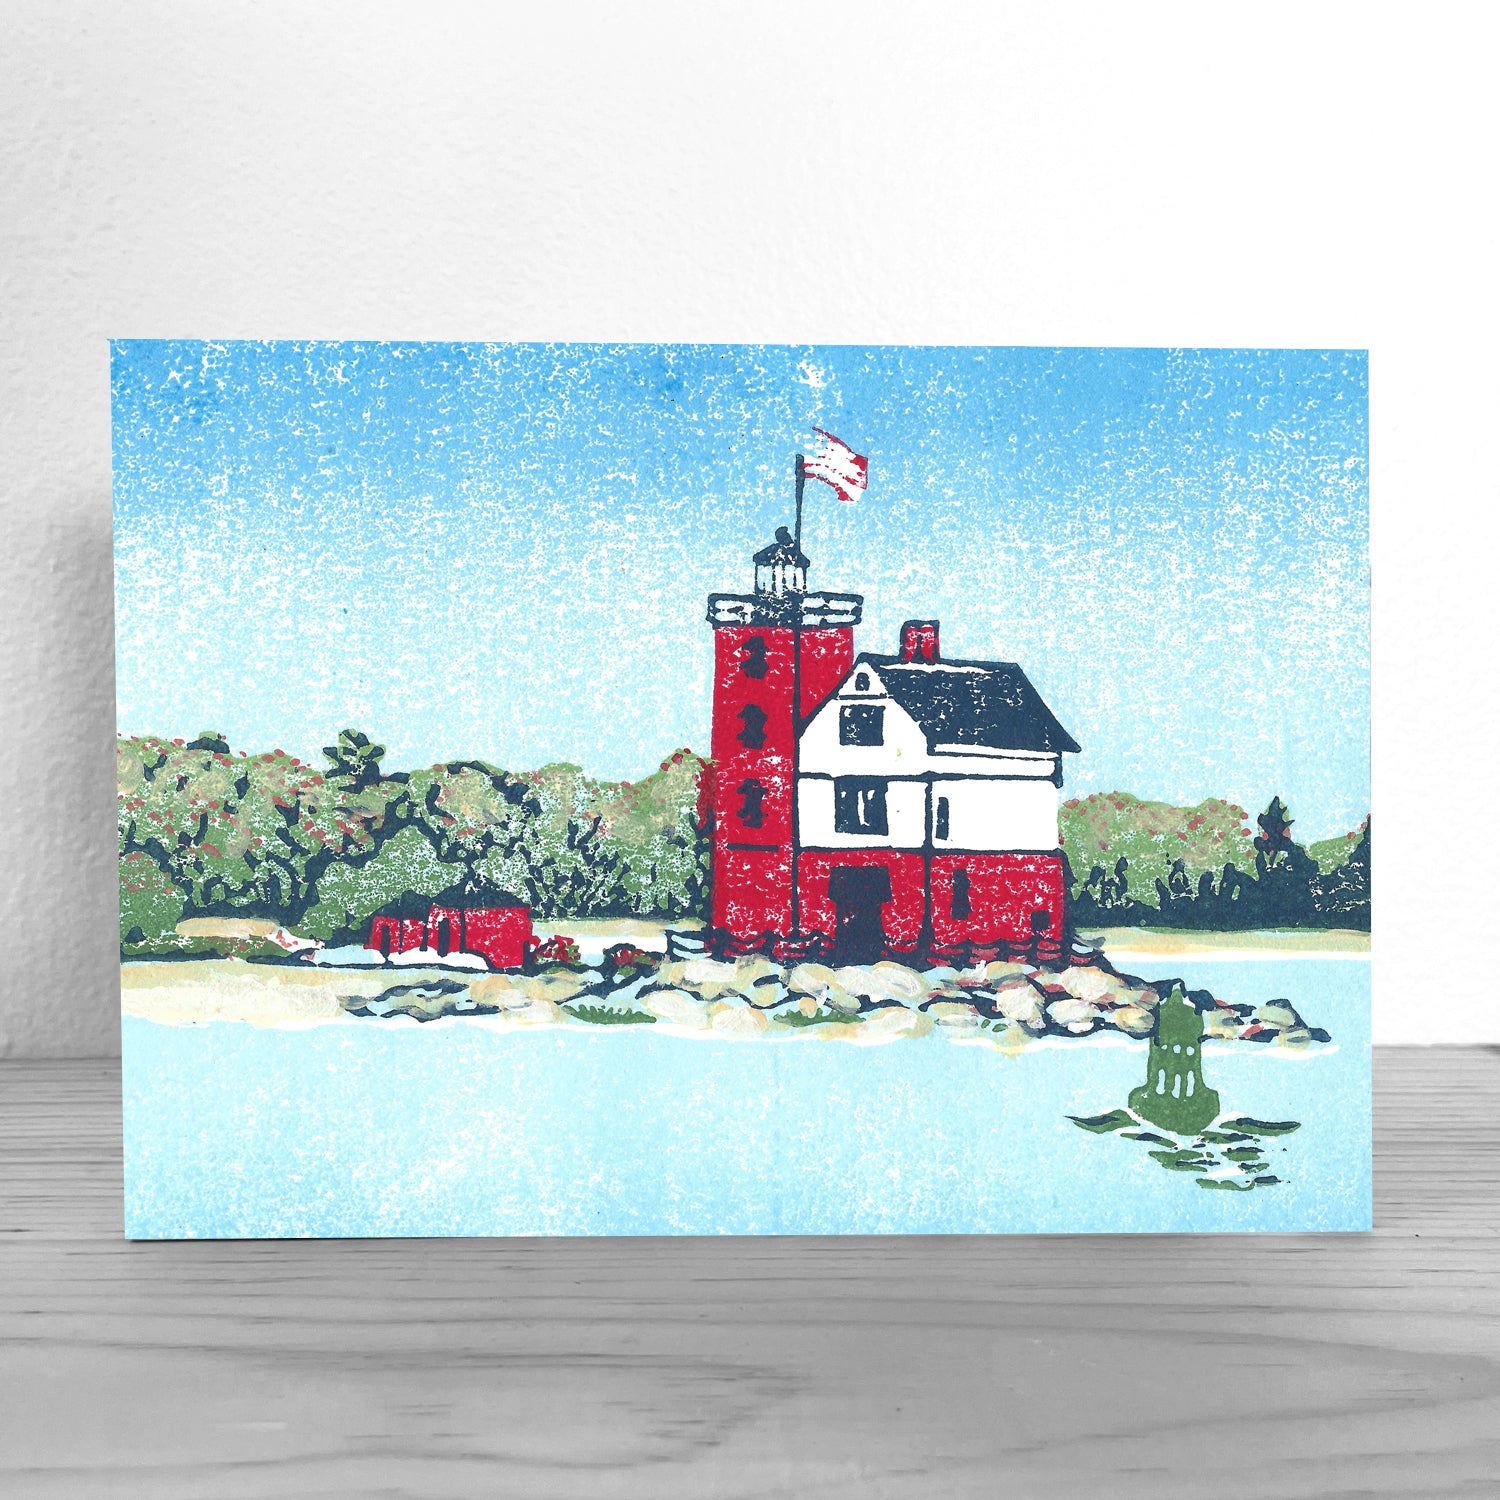 This giclée is a fine art reproduction of a linoleum block print by Natalia Wohletz of Peninsula Prints inspired by Round Island Lighthouse located near Mackinac Island, Michigan. 